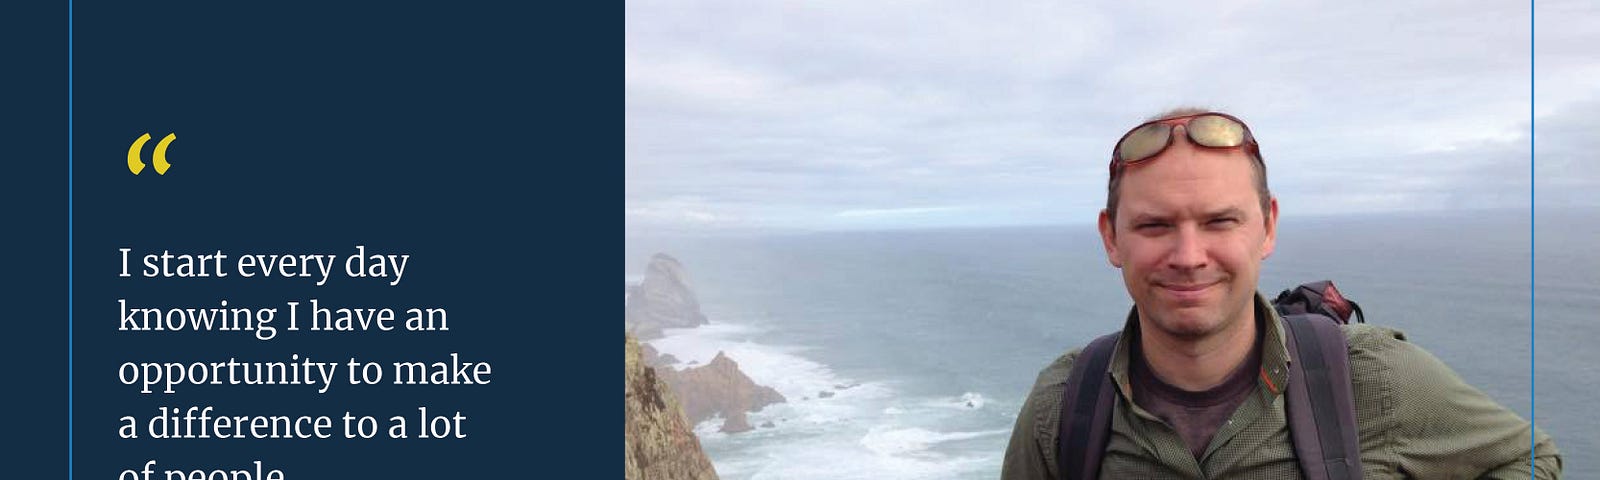 Text: I start every day knowing I have an opportunity to make a difference to a lot of people. — Bill Chapman, Engineer, U.S. Digital Service. Photo of man with sunglasses on his head in front of a coast.